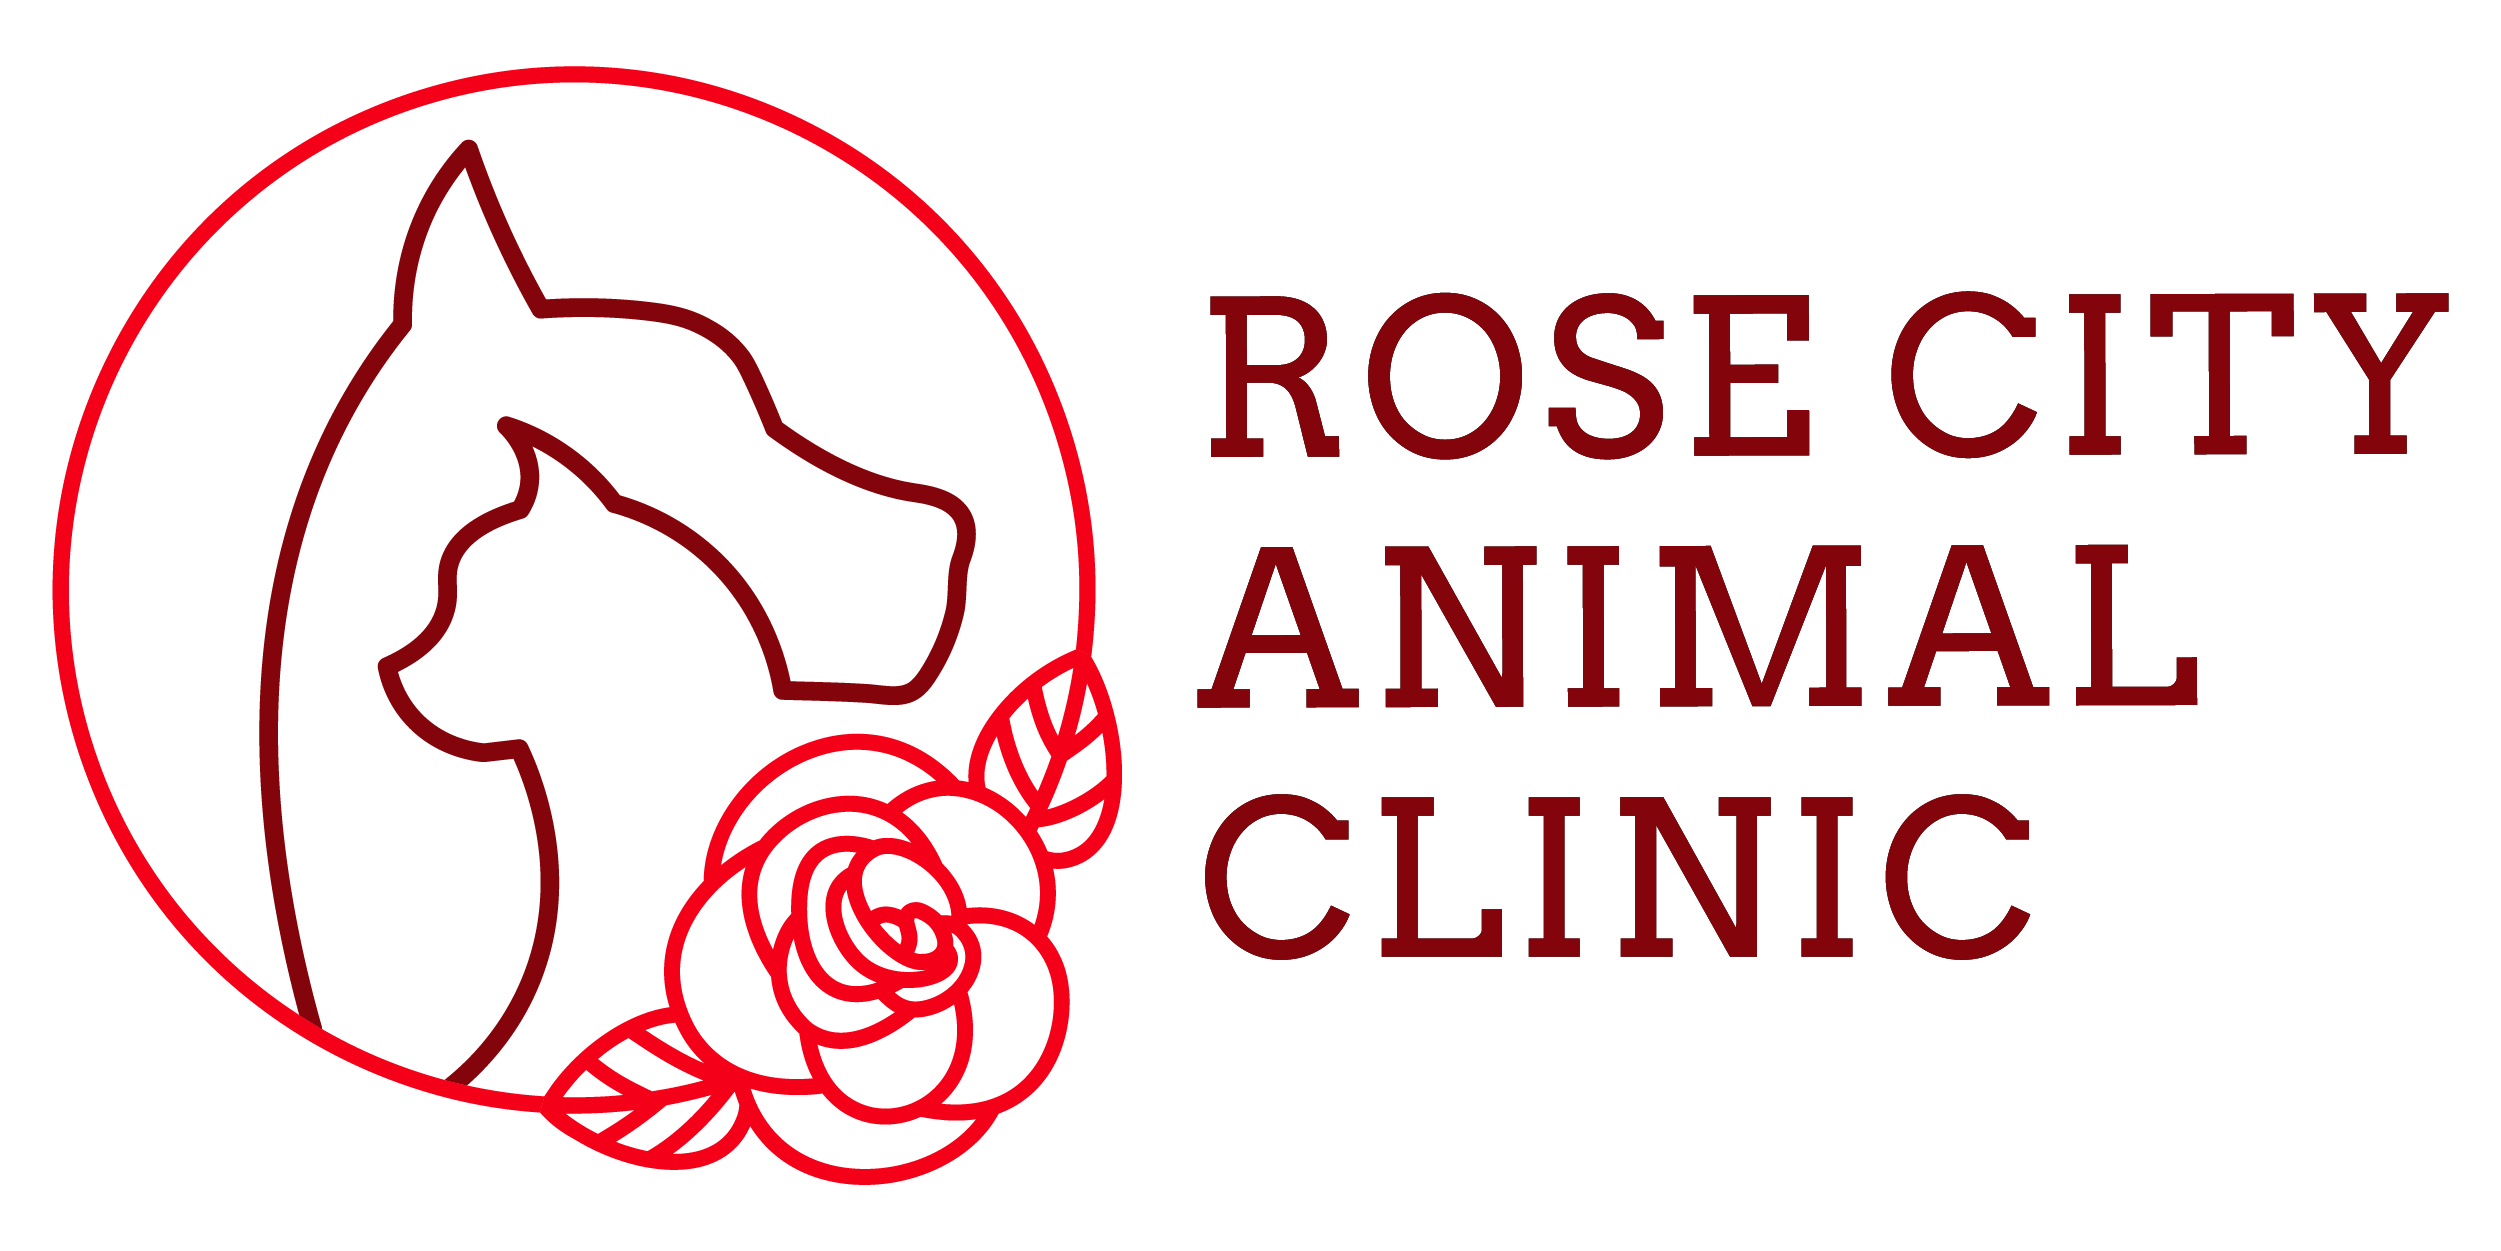 Rose City Animal Clinic | High Quality Veterinarian Care in Tyler, Texas